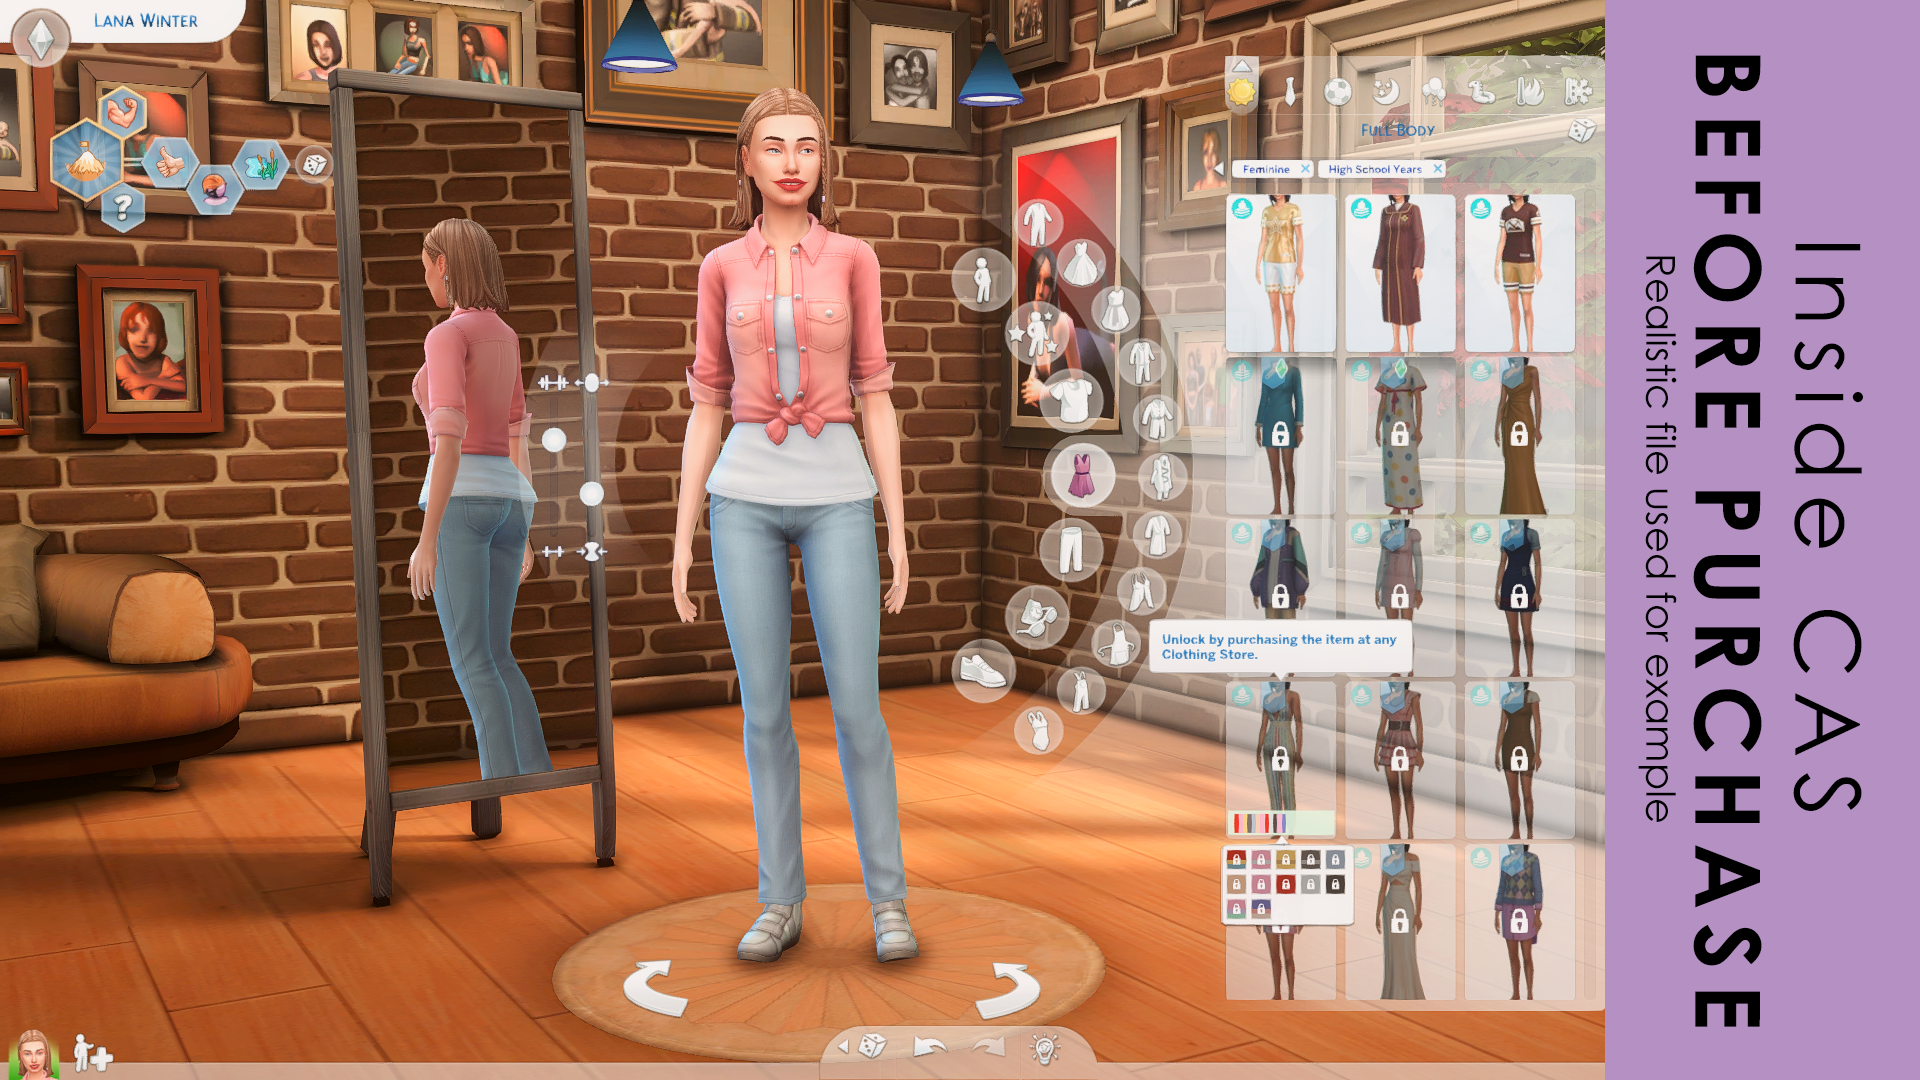 How to Unlock All Items in the Sims 4